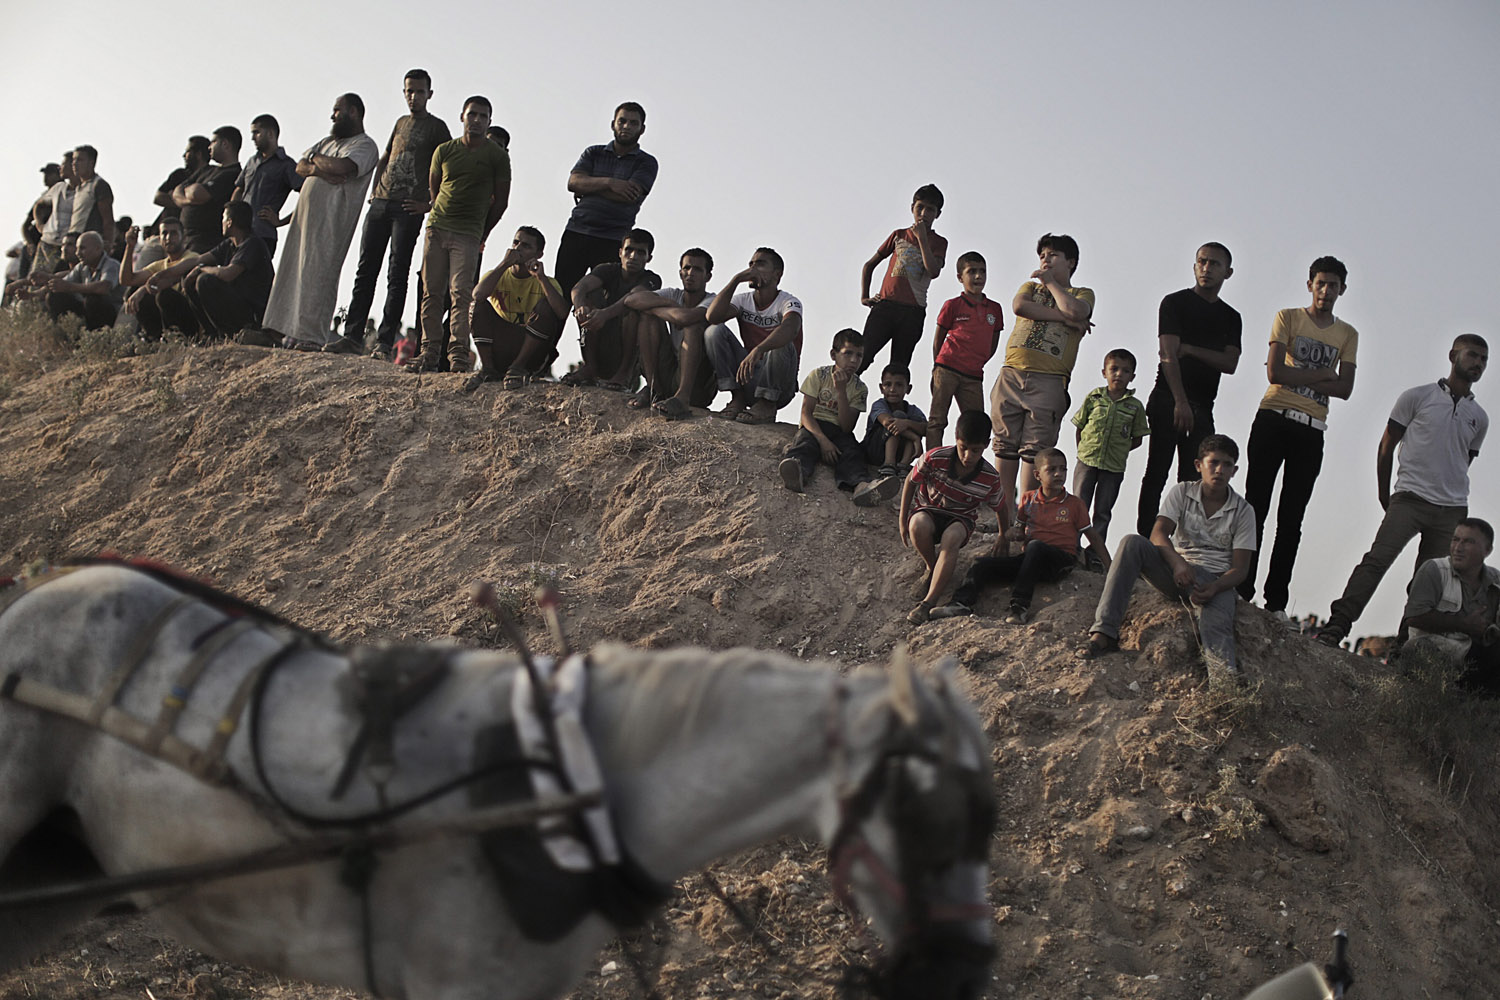 Sept. 1, 2013. Palestinian spectators attend a horse race and show in the North of the Gaza Strip.